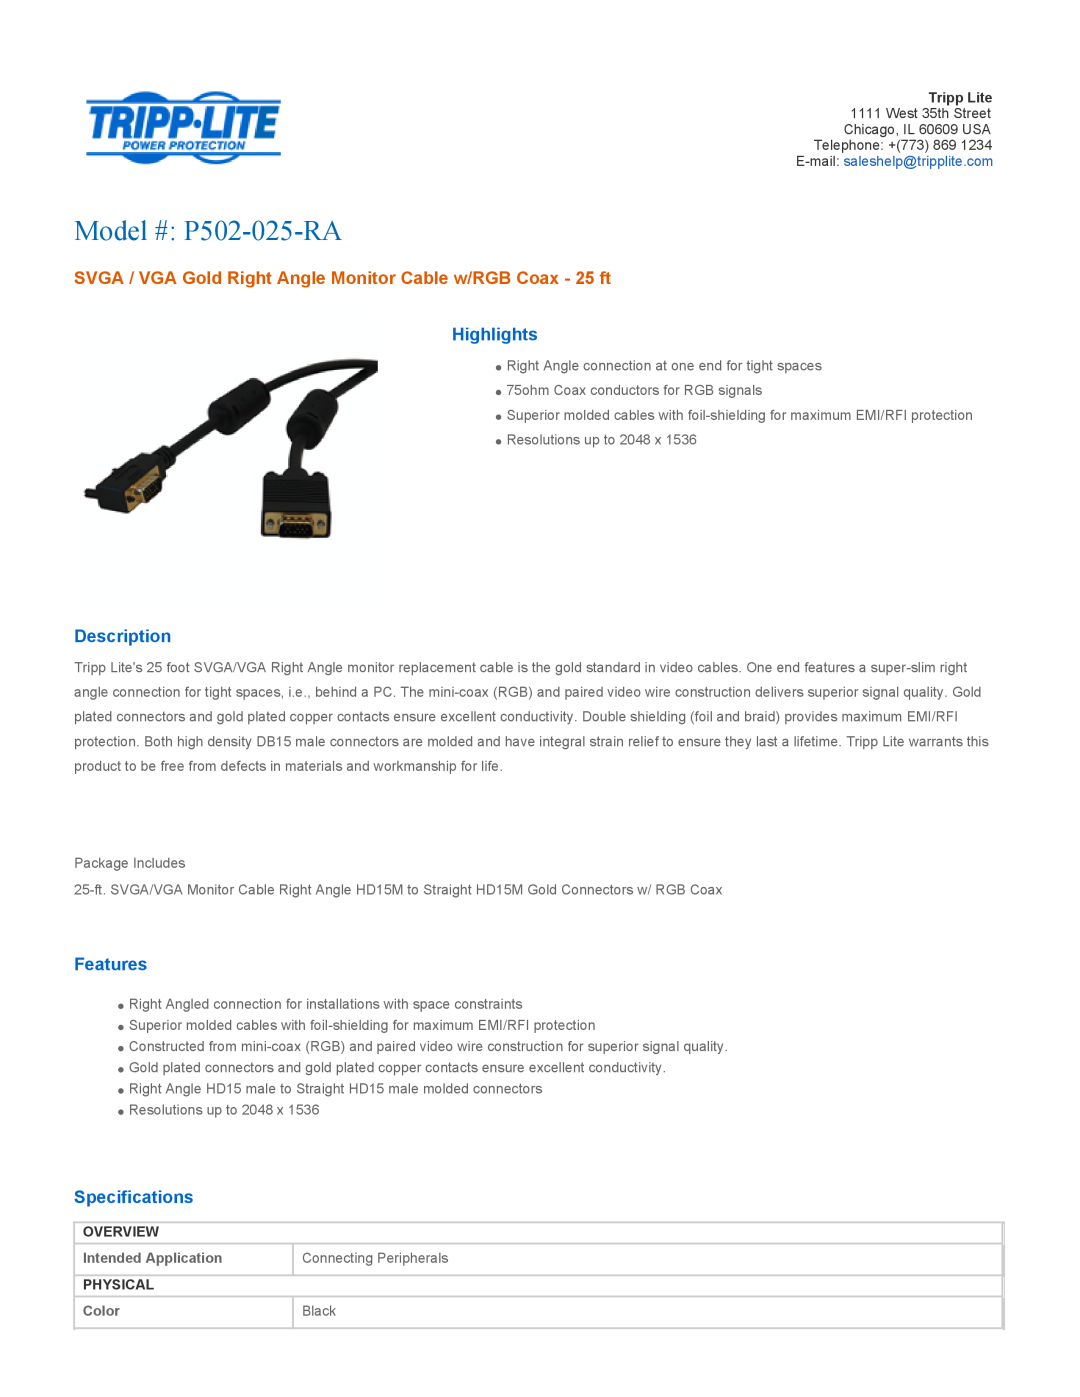 Tripp Lite P502-025-RA specifications Overview, Intended Application, Connecting Peripherals, Physical, Color, Black 